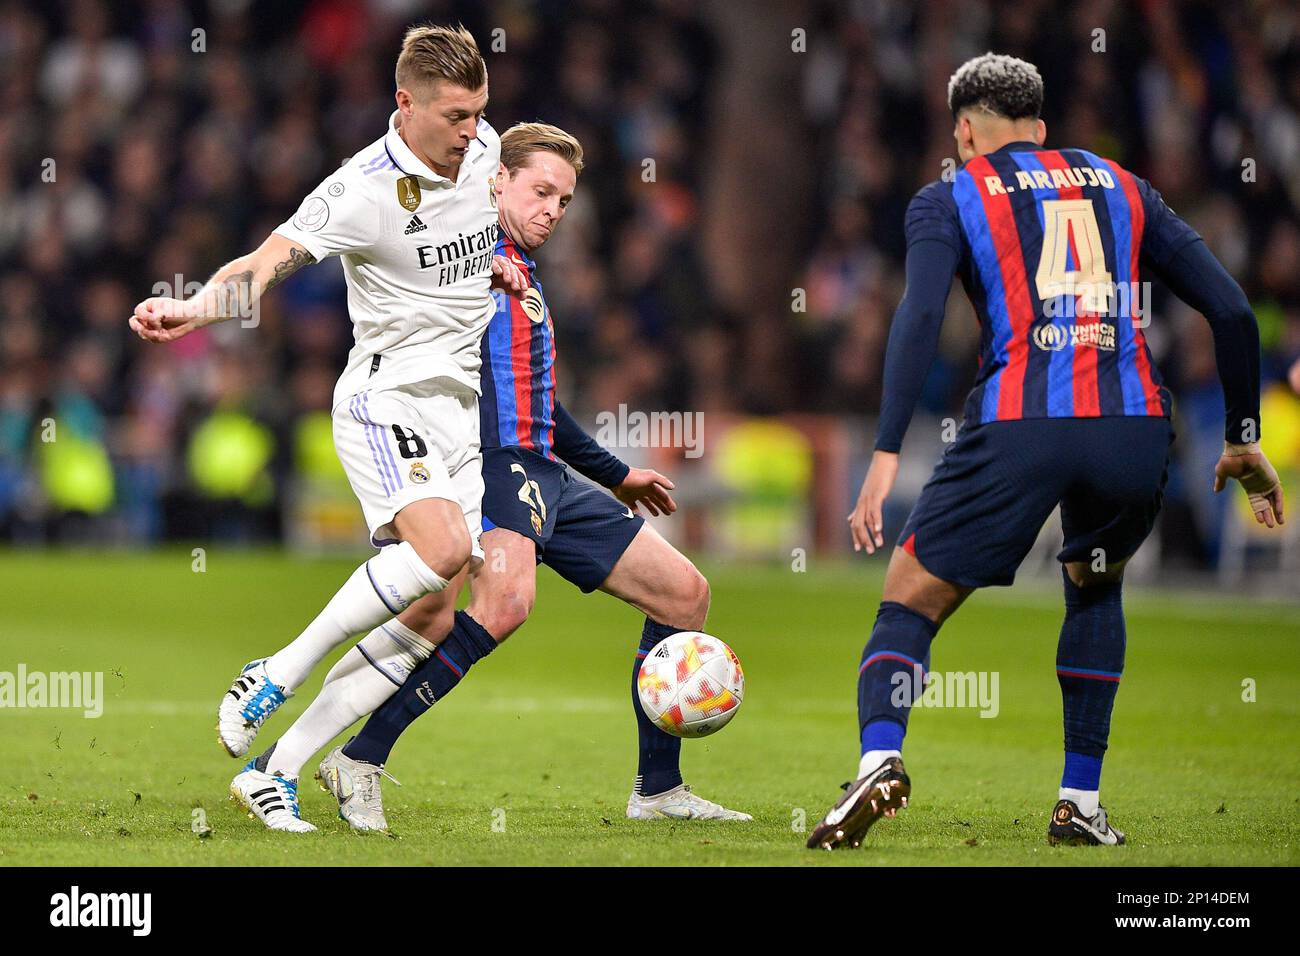 MADRID, SPAIN - MARCH 2: Toni Kroos of Real Madrid battles for the ball with Frenkie de Jong of FC Barcelona and Ronald Araujo of FC Barcelona during the Semi Final Leg One - Copa Del Rey match between Real Madrid CF and FC Barcelona at the Estadio Santiago Bernabeu on March 2, 2023 in Madrid, Spain (Photo by Pablo Morano/BSR Agency) Stock Photo